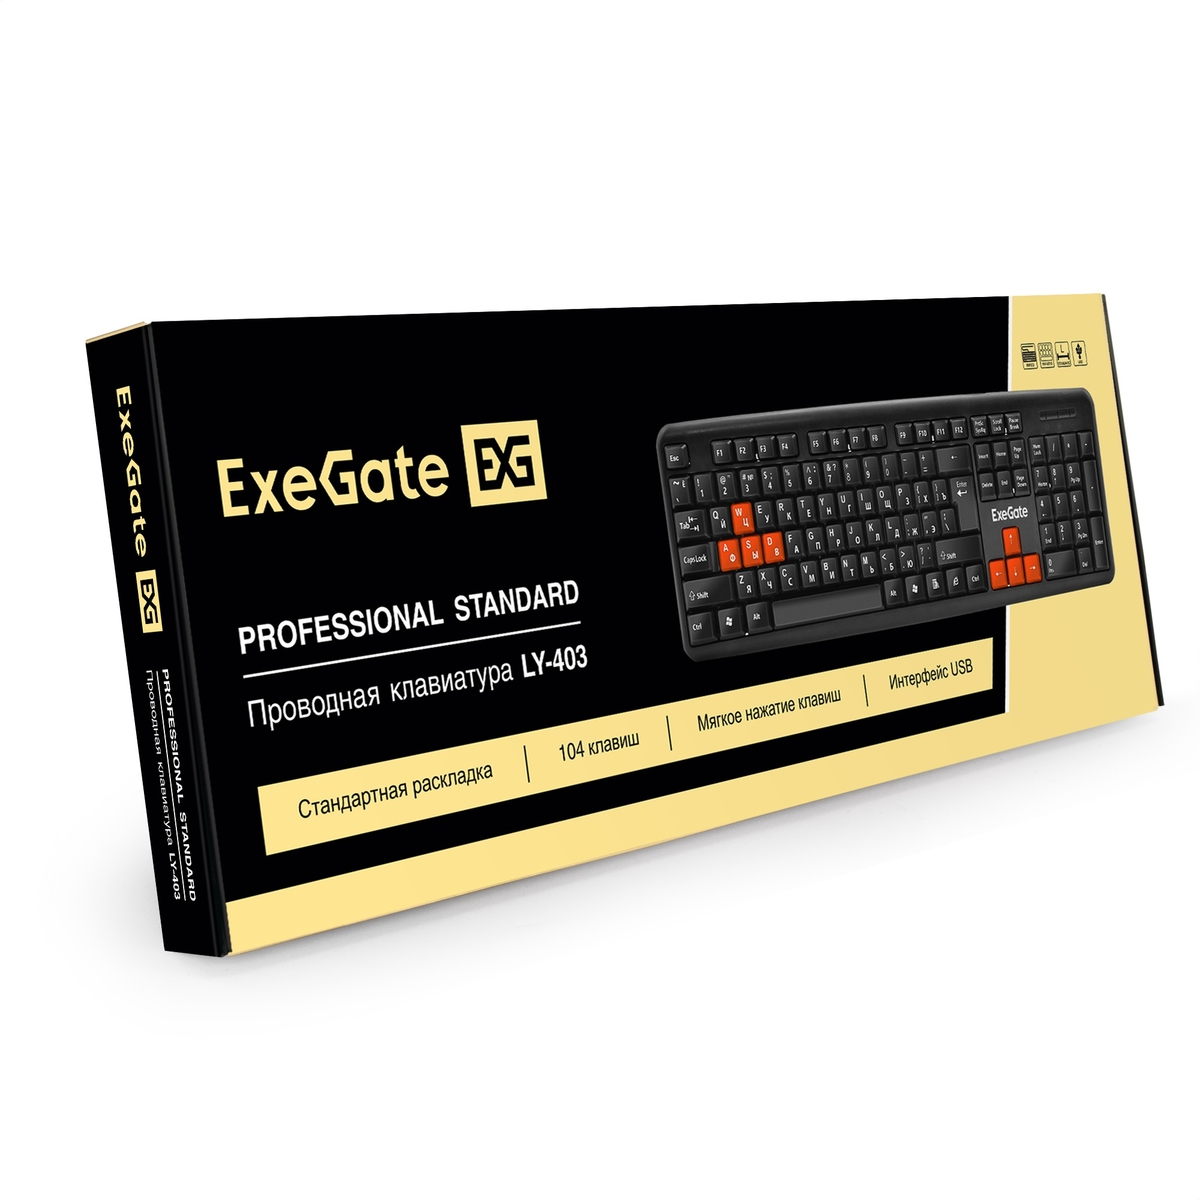 ExeGate Professional Standard LY-403 Color box